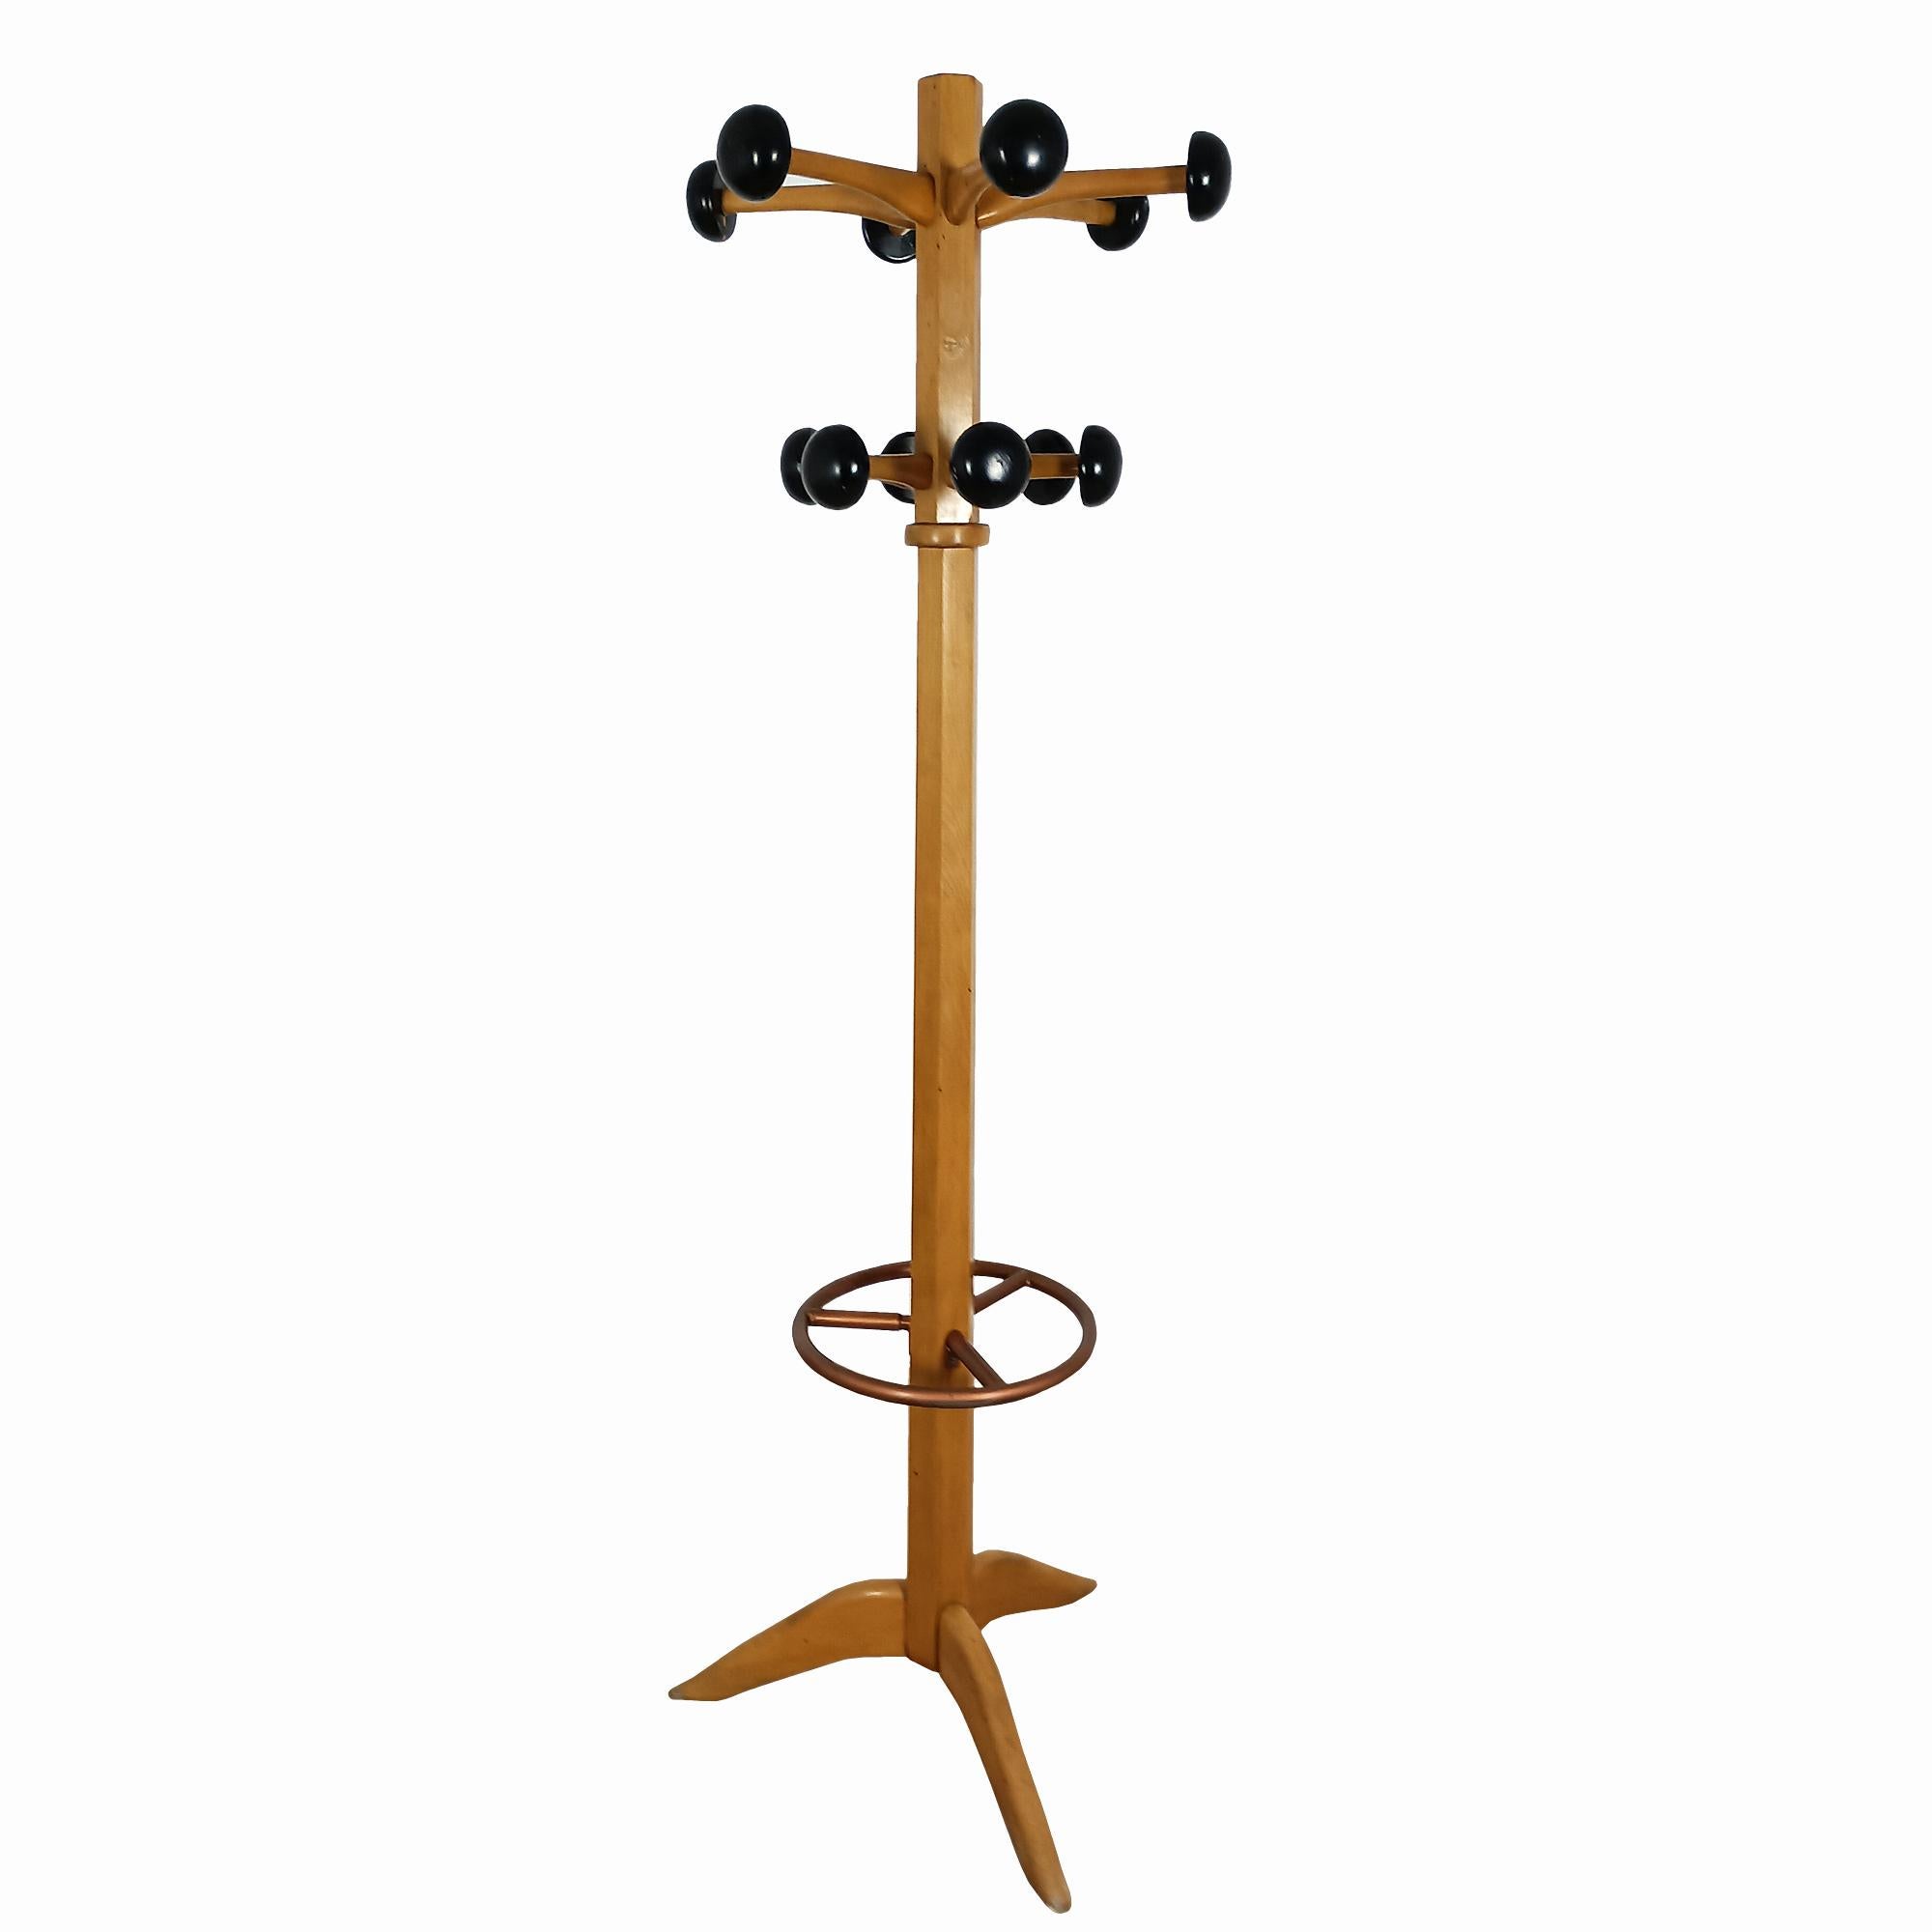 Coat rack in solid beech with 12 black lacquered coat hooks. Copper metal umbrella stand. Removable upper part. 
Manufactured by Stella. Original label.

France c. 1950.